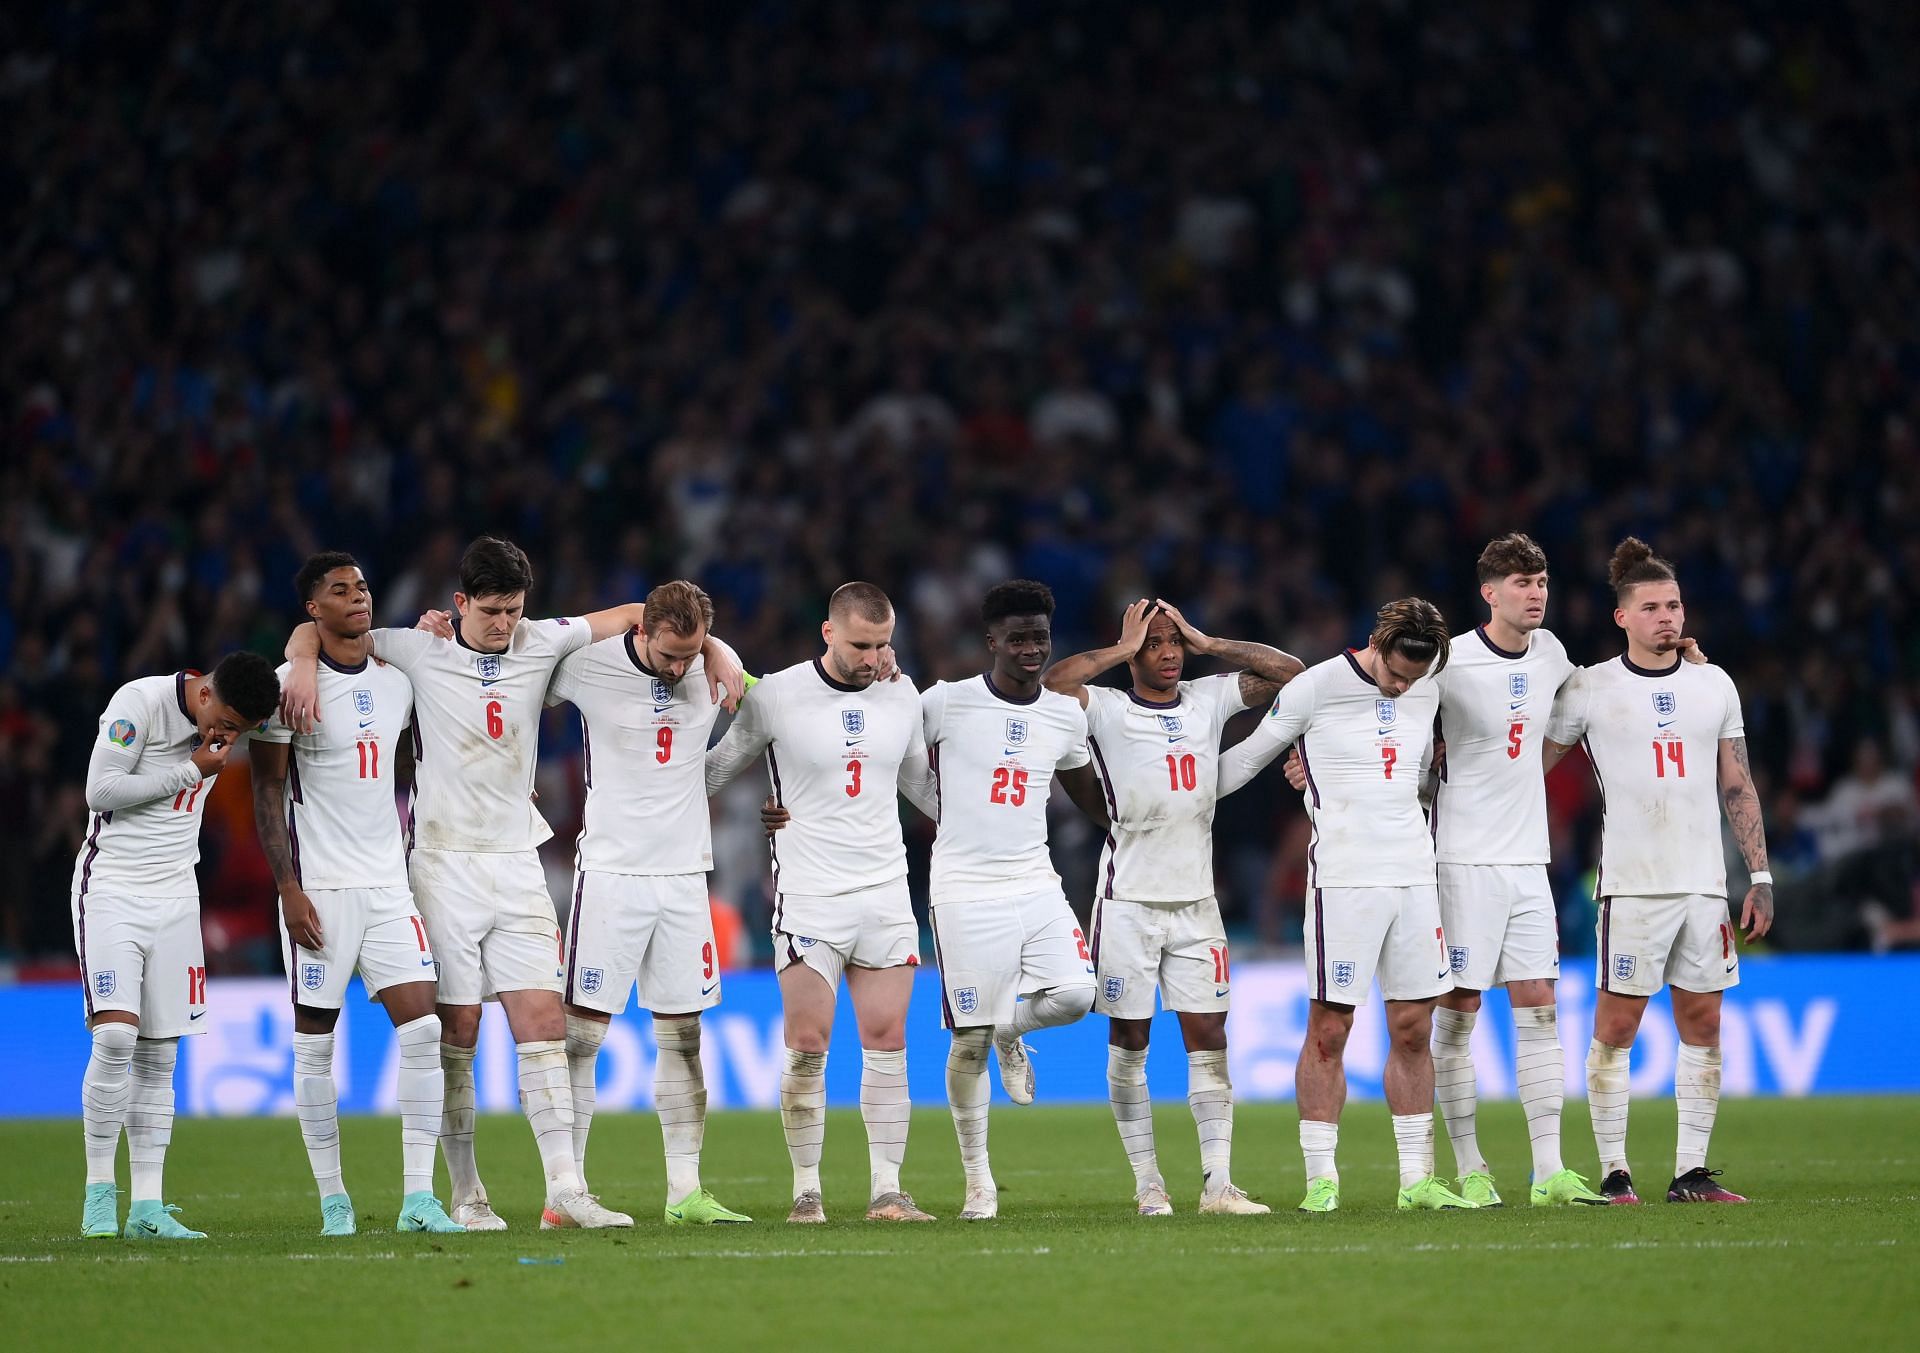 England watch on during the Euro 2020 final against Italy